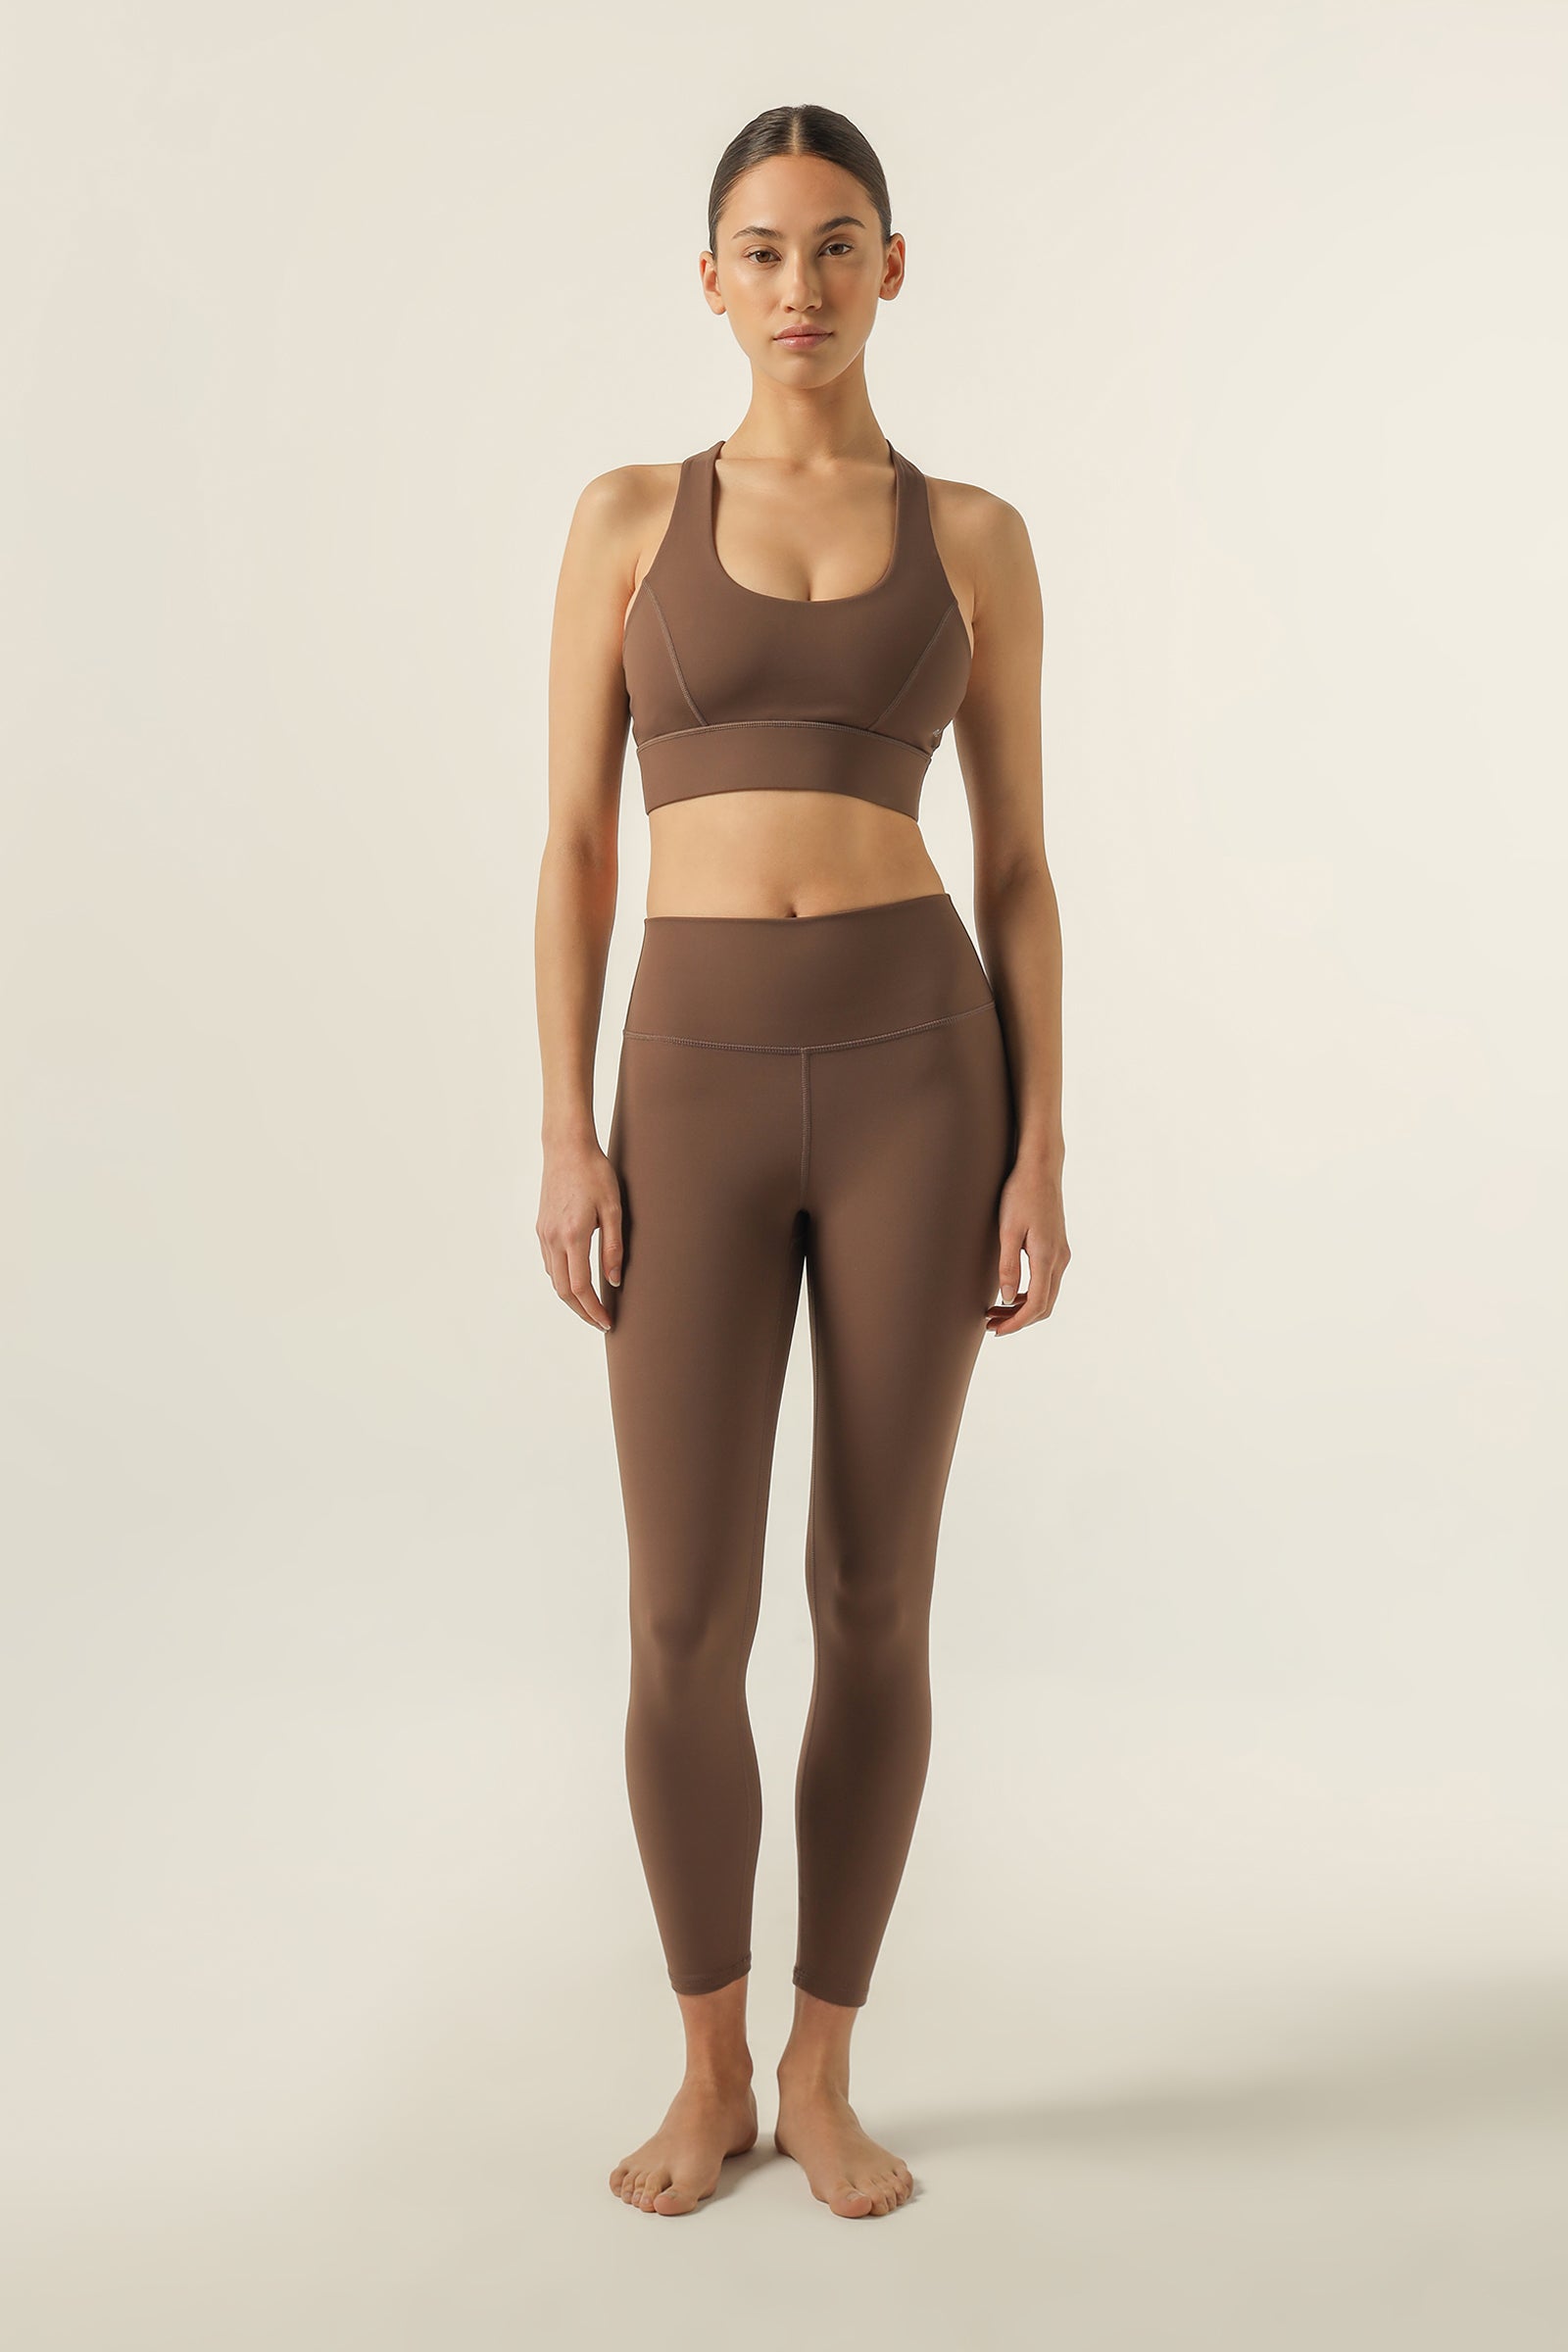 Nude Lucy Nude Active Tights in Chestnut